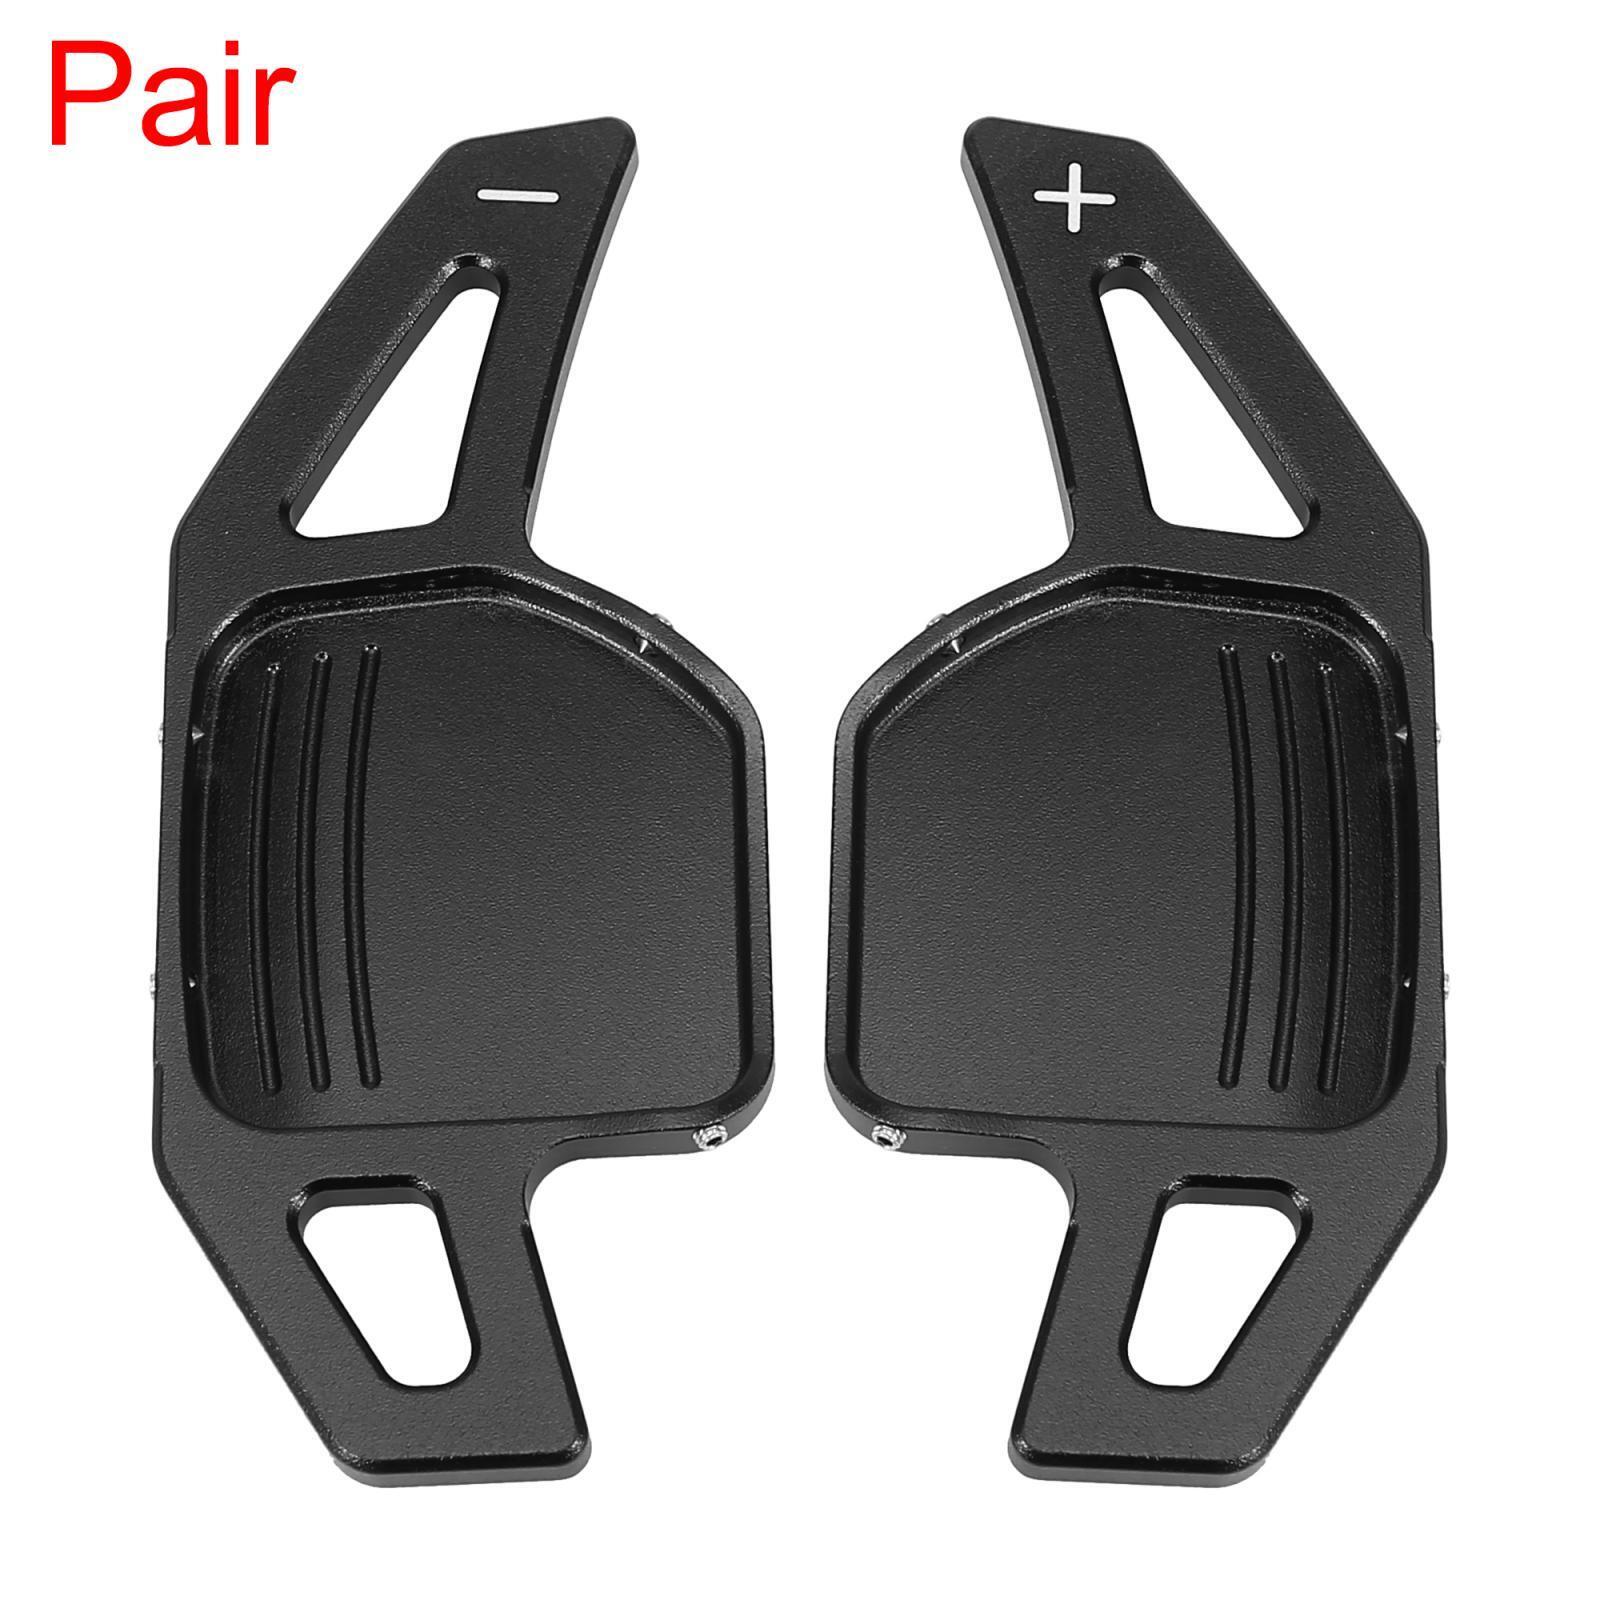 Pair Black Steering Wheel Shift Paddle Cover for Audi A3 A5 A6 A7